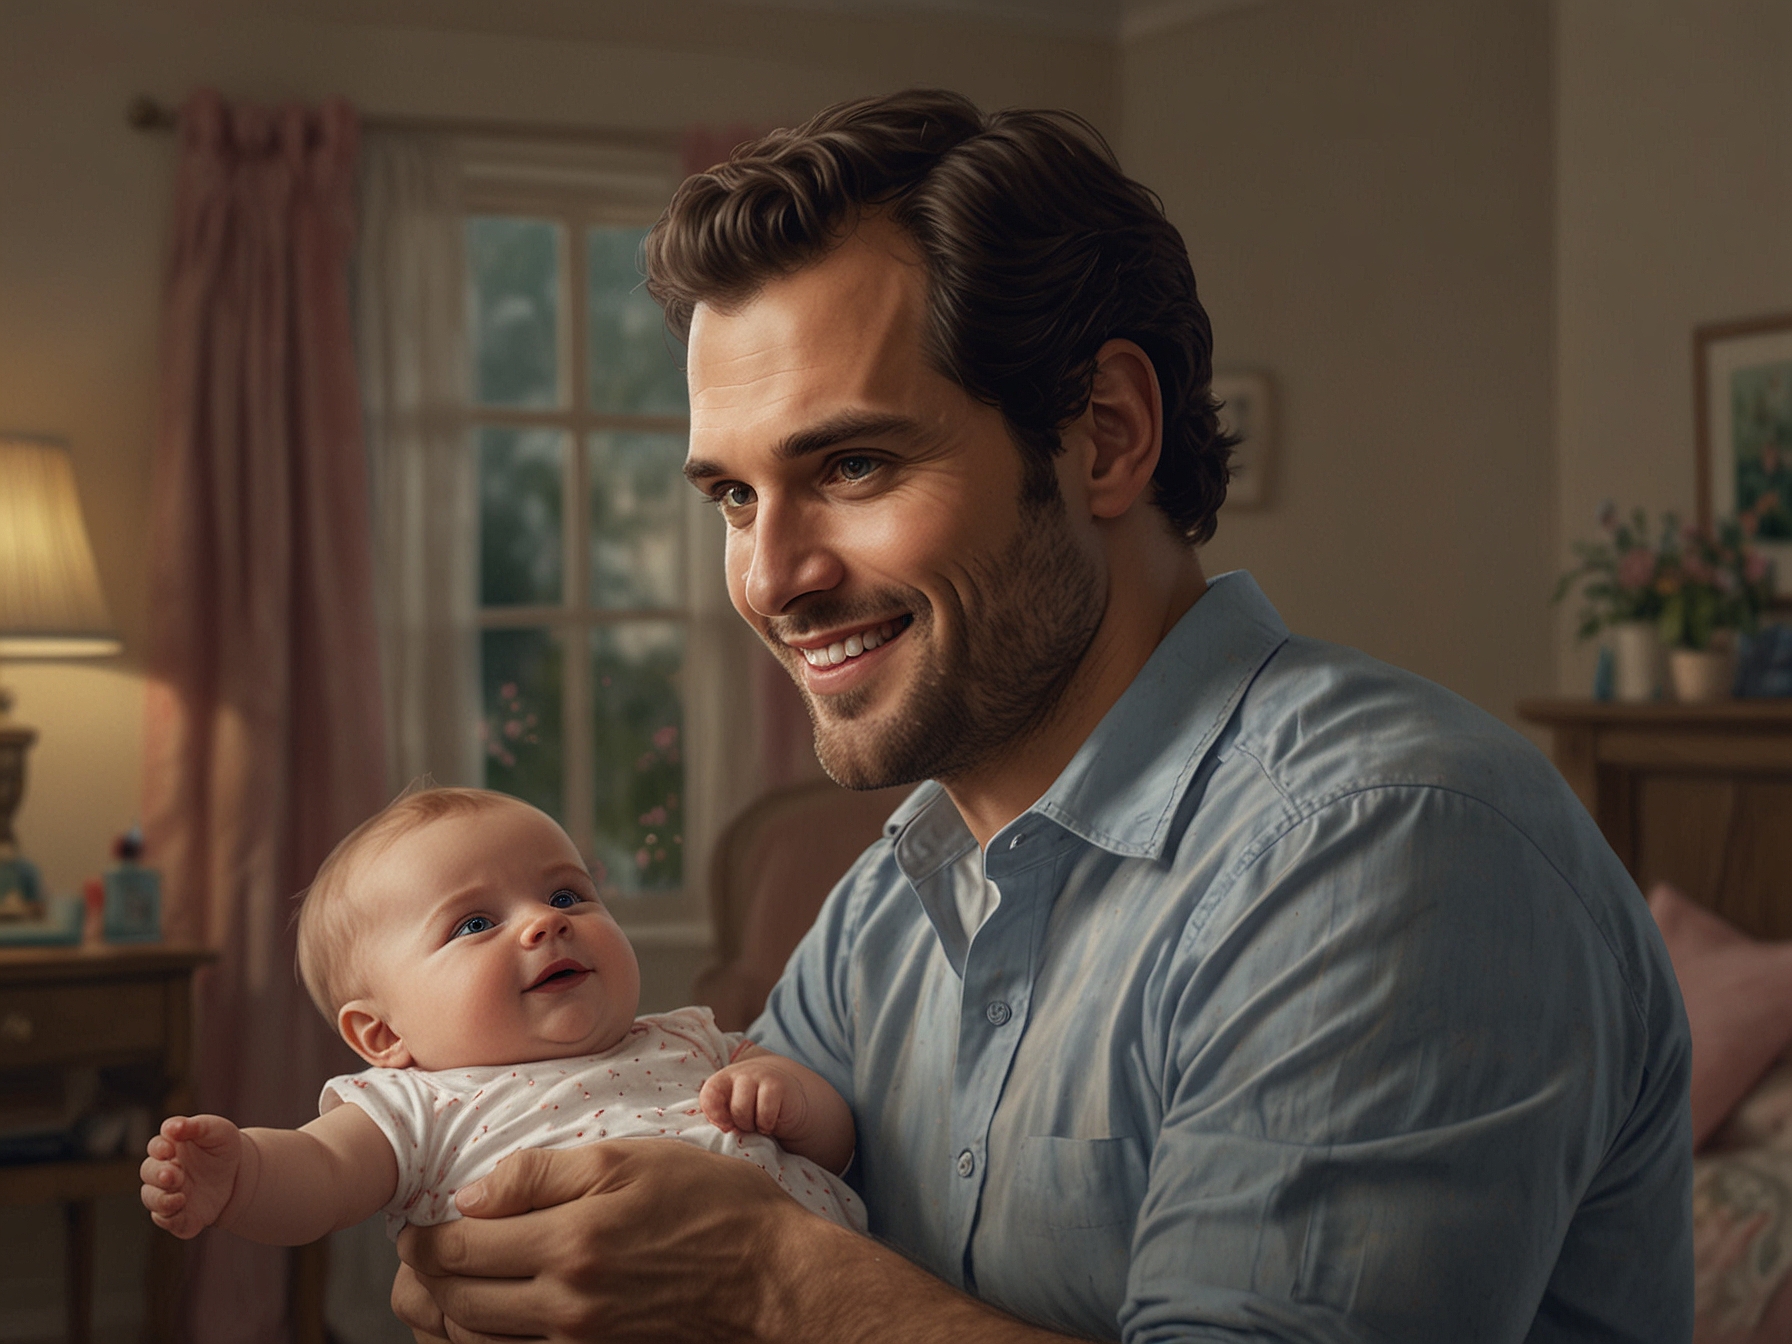 Henry Cavill smiles warmly as he holds a small baby outfit in a beautifully decorated nursery with pastel colors and soft lighting, capturing his excitement for fatherhood.